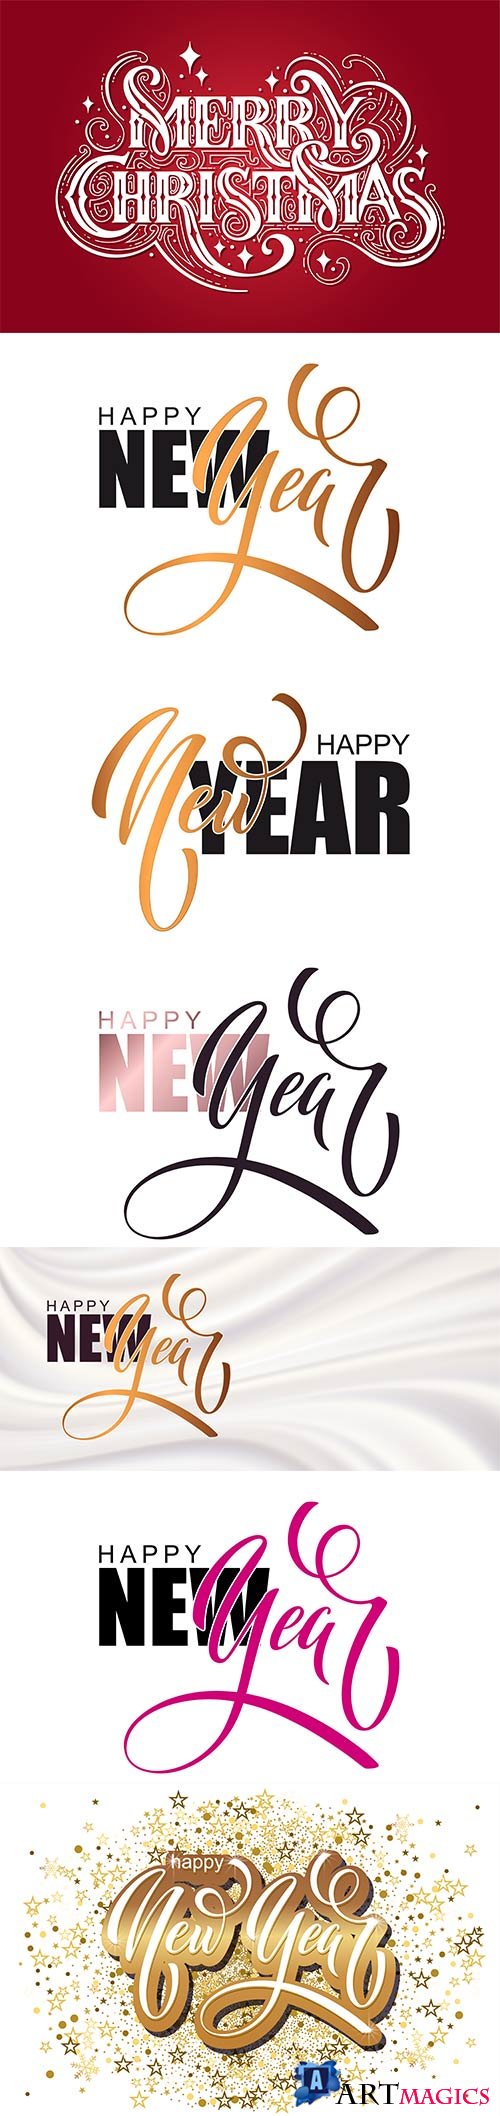 Happy new year hand lettering calligraphy vector illustration